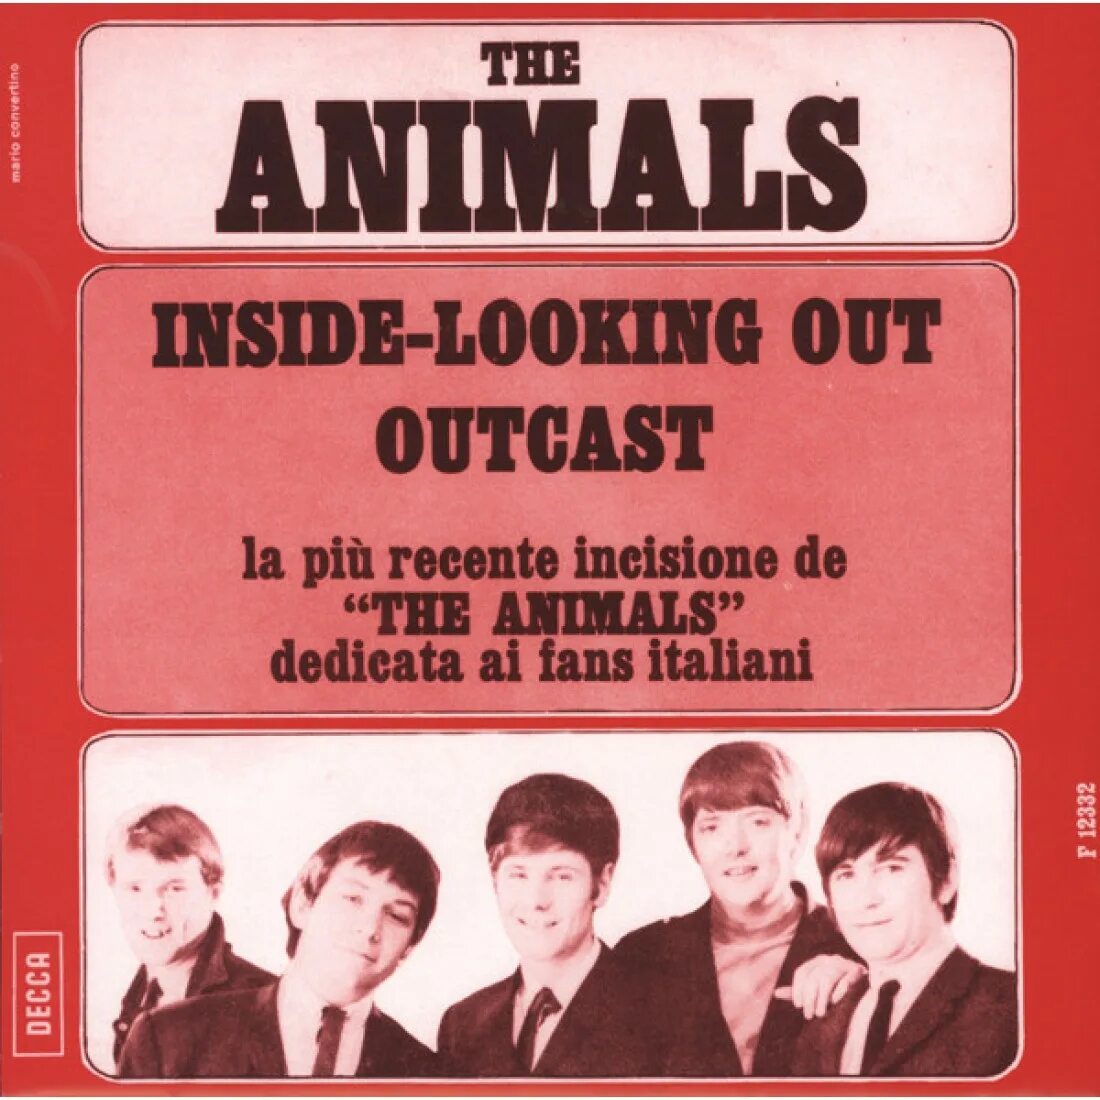 Animals inside. The animals inside looking out. Animals песня.